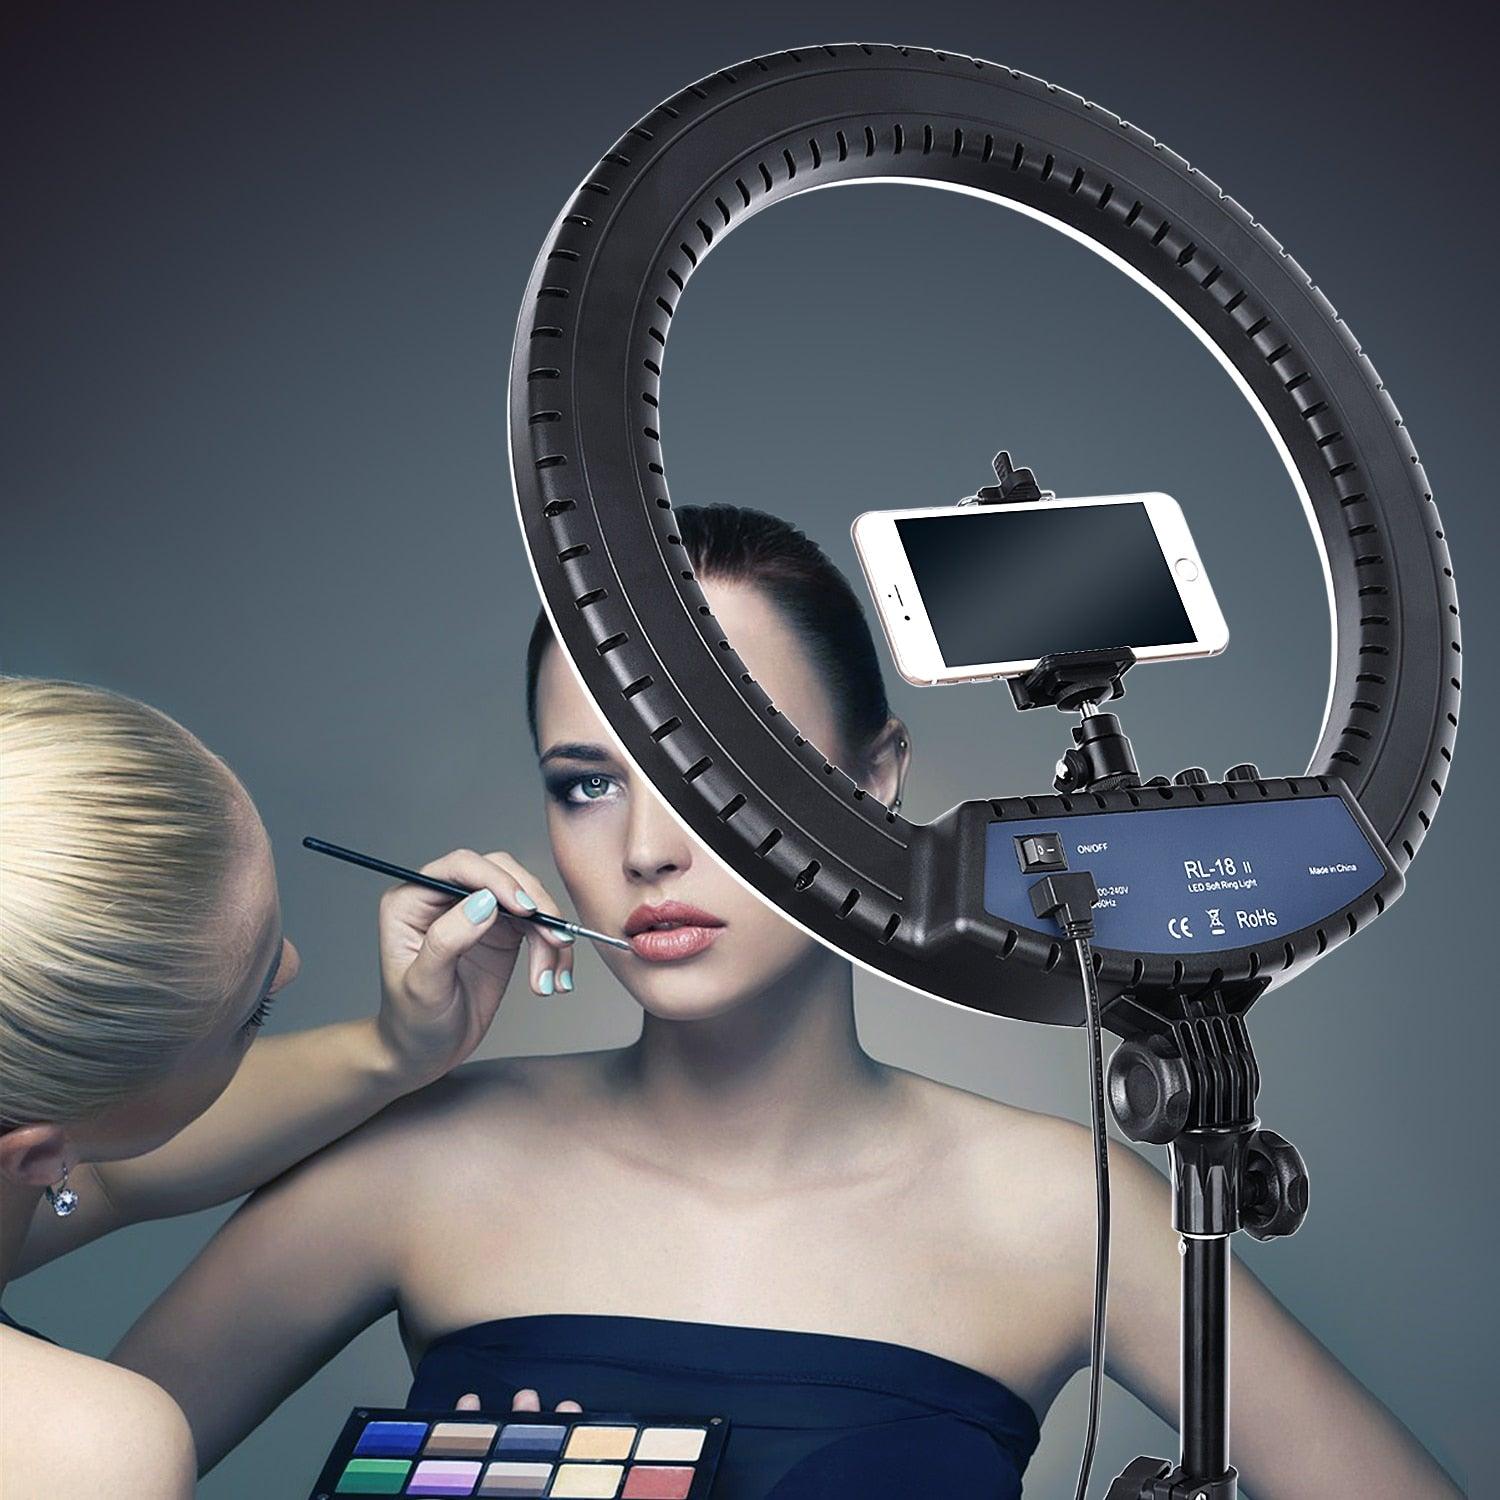 FOSOTO RL-18II Led Ring Light 18 Inch Ring Lamp 55W Ringlight Photography Lamp With Tripod Stand For Phone Makeup Youtube Tiktok - YOURISHOP.COM